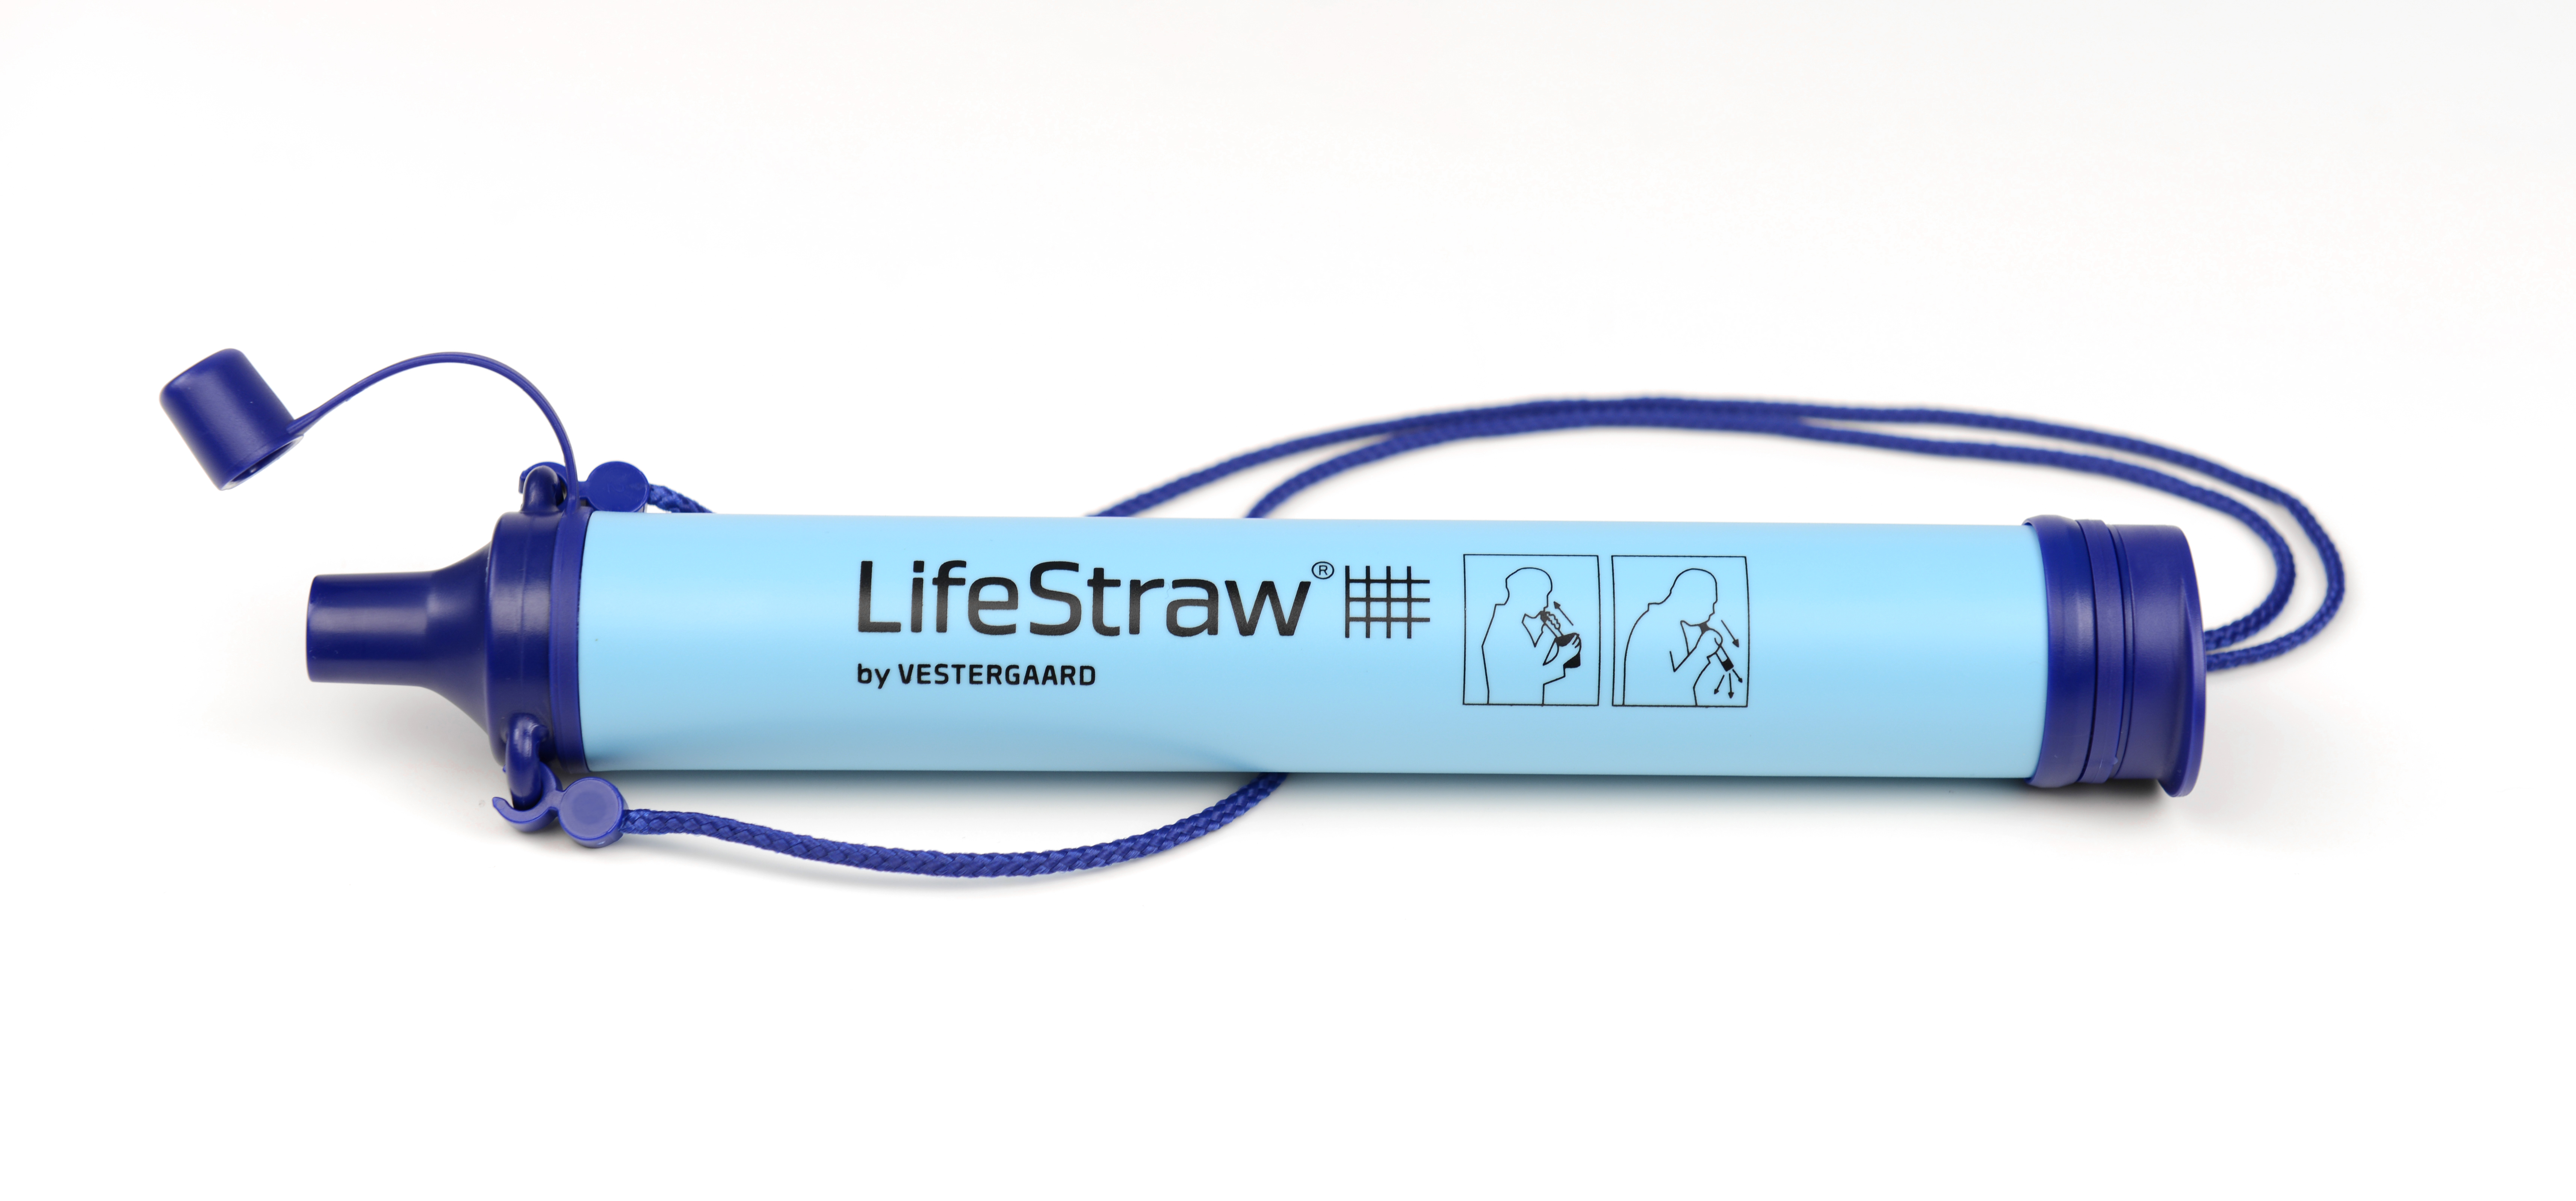 The LifeStraw explained: How it filters water and eradicates